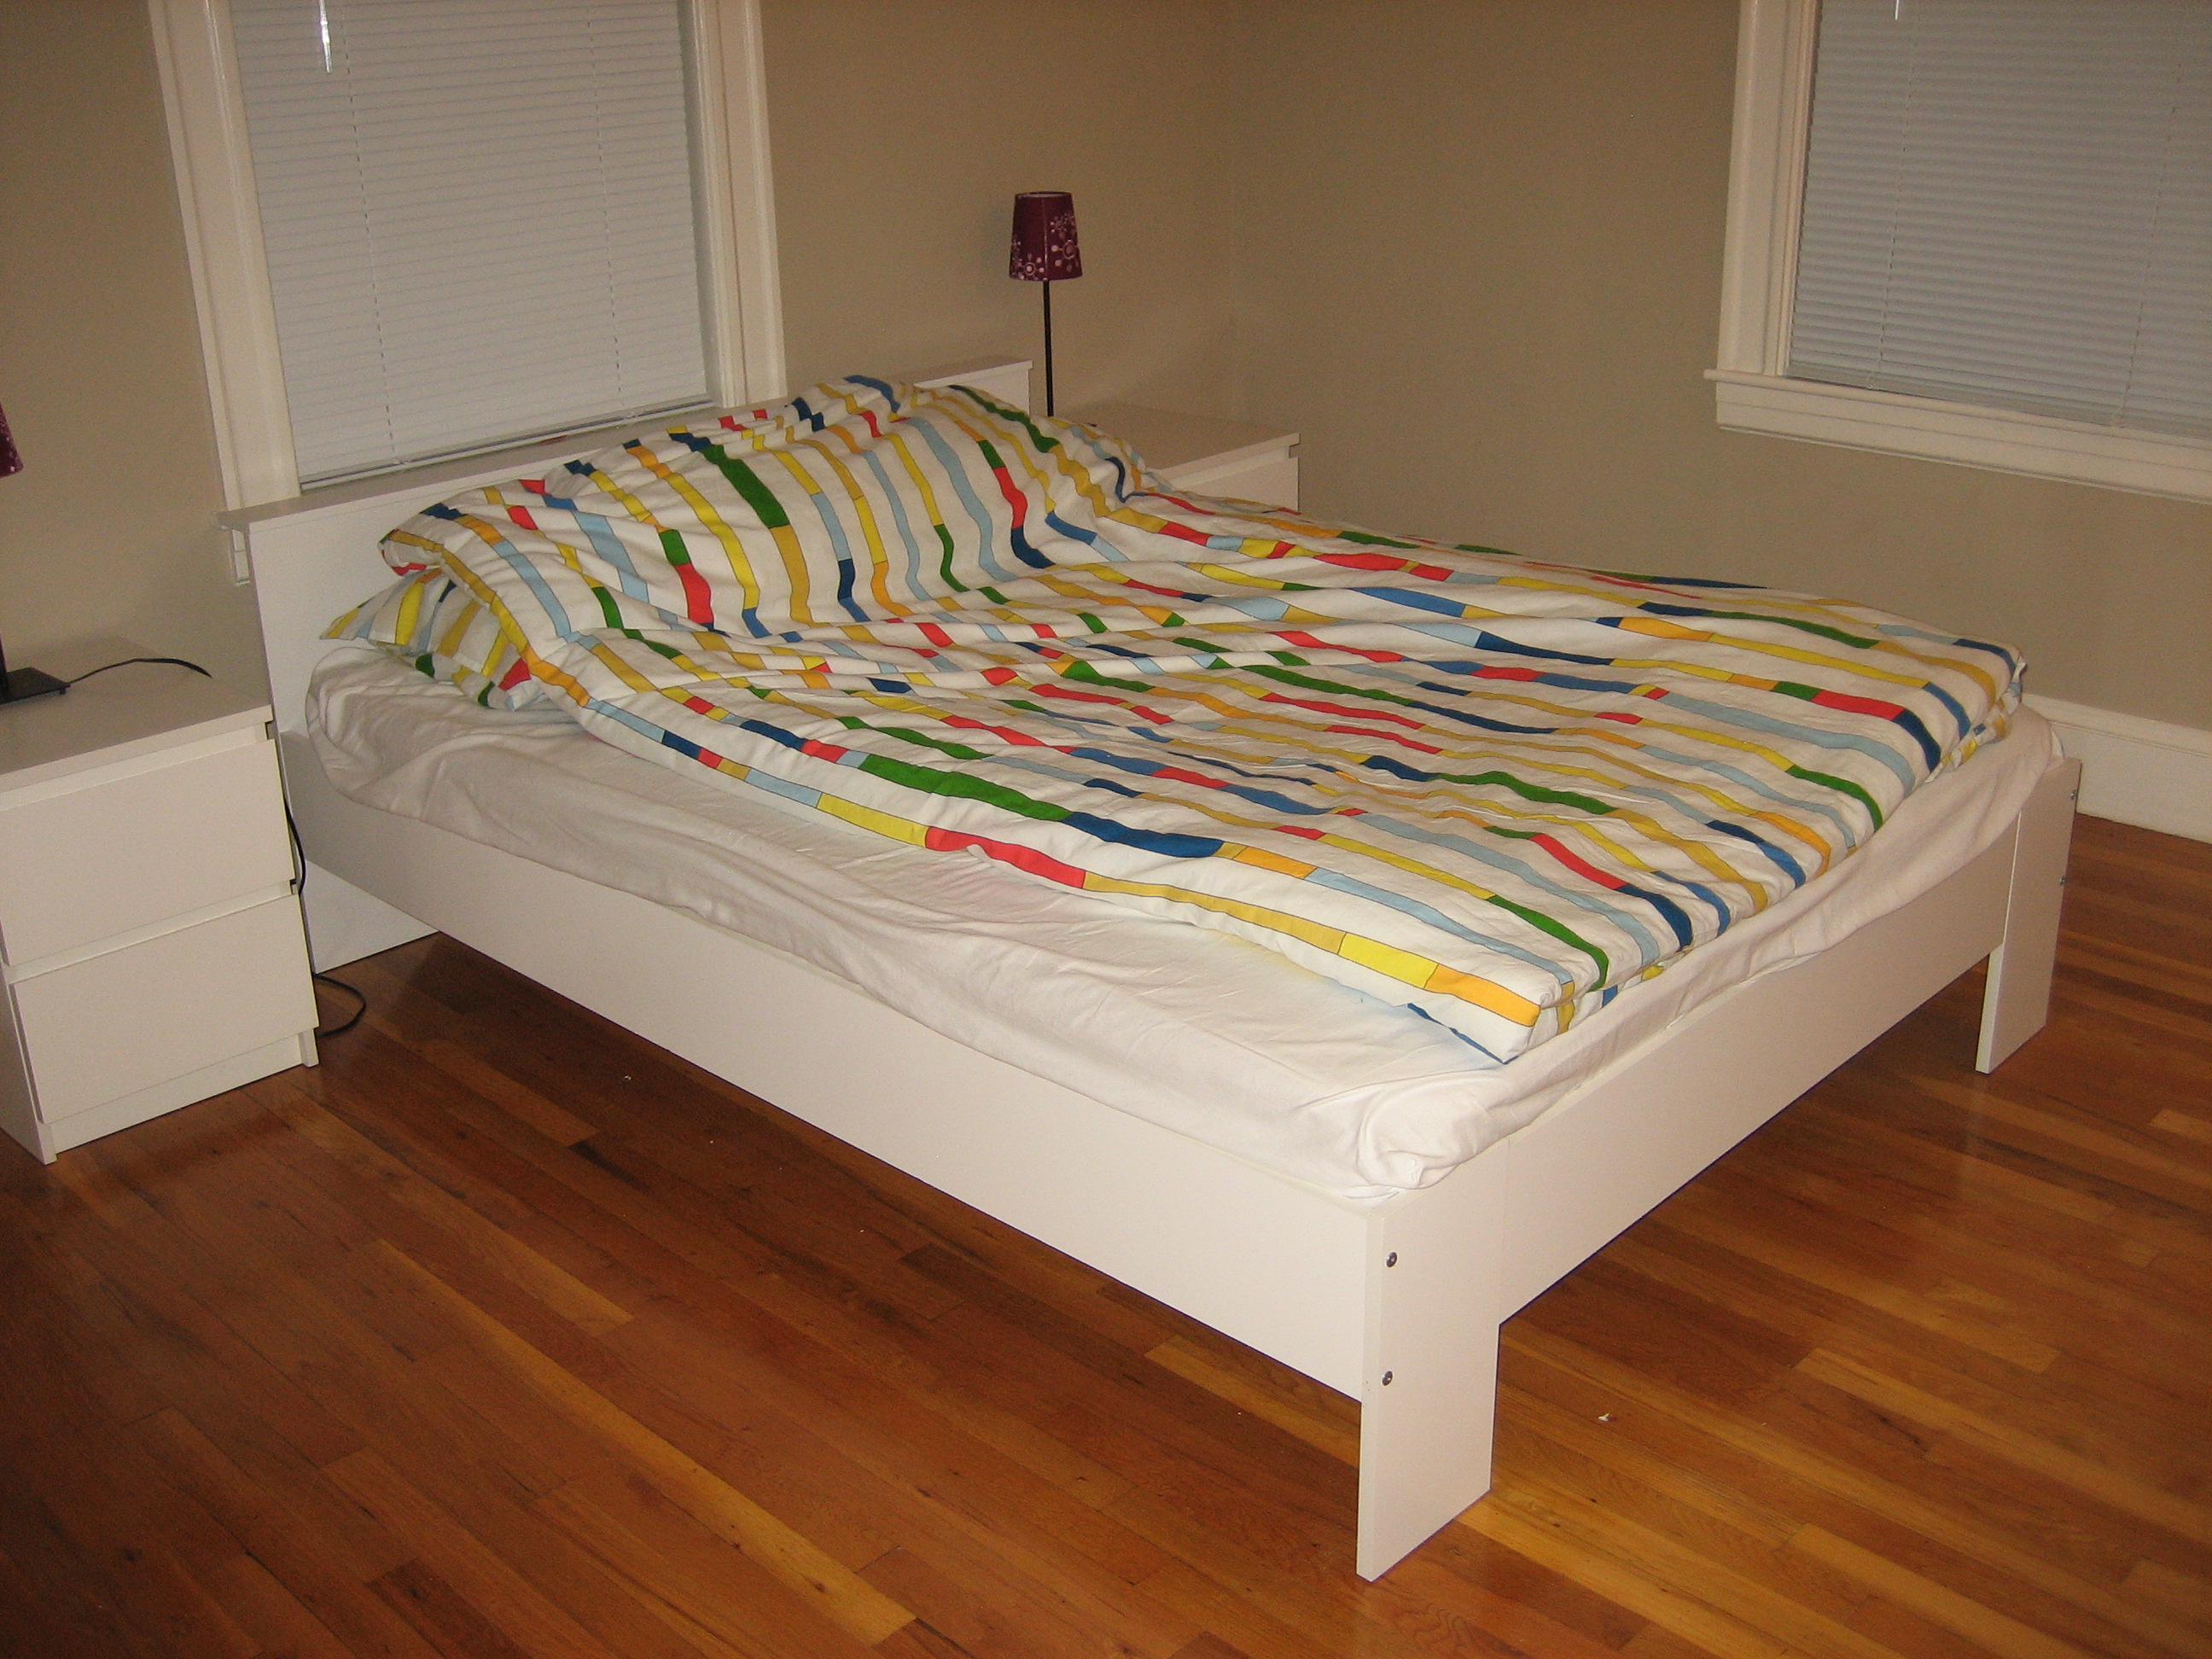 ikea bed box spring and mattress